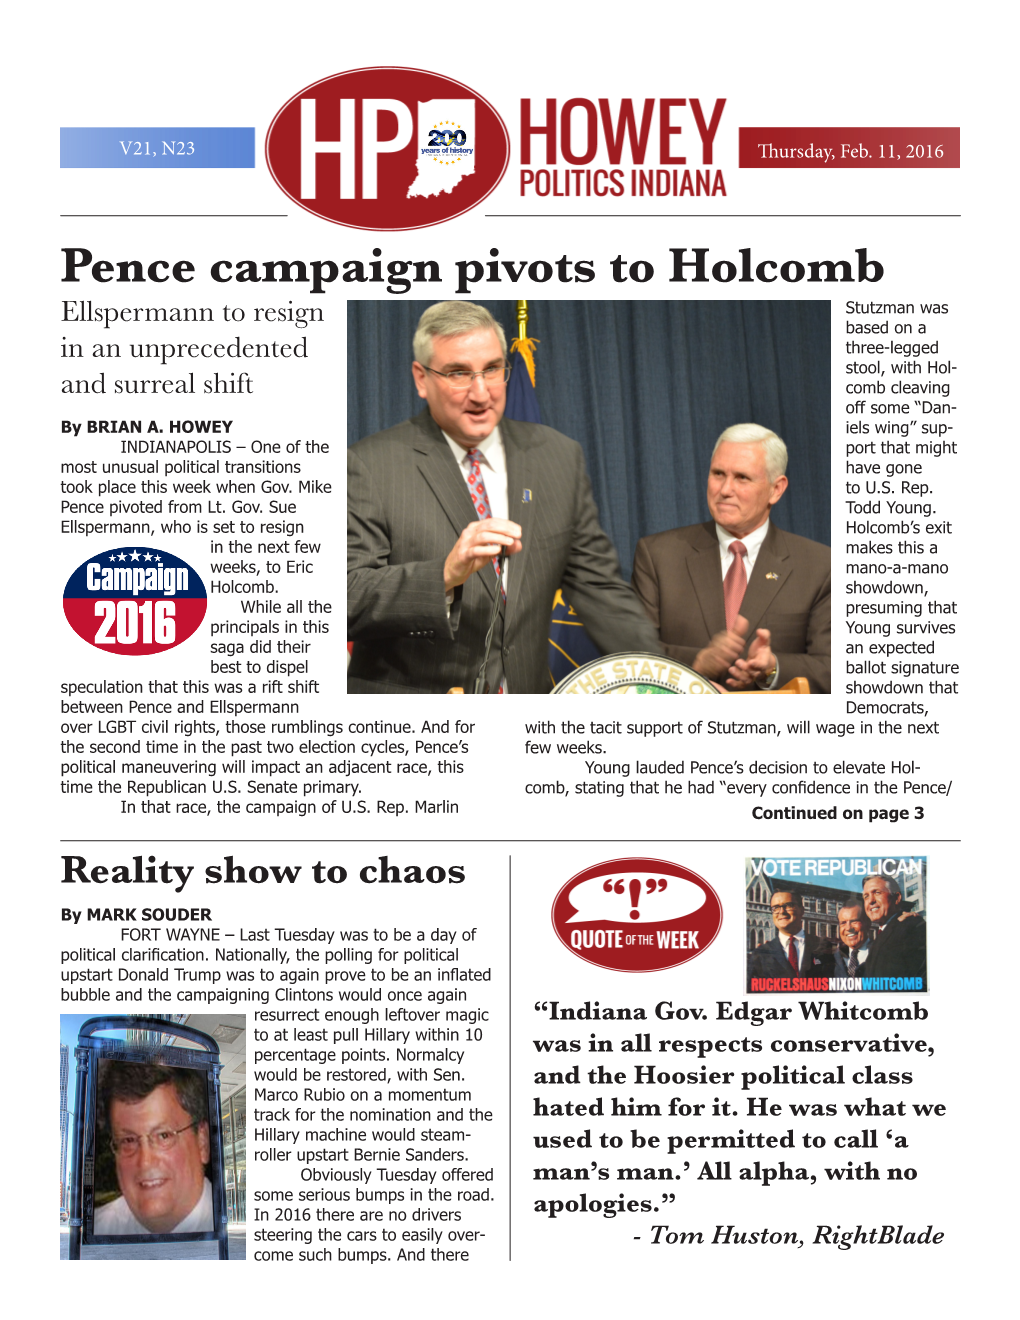 Pence Campaign Pivots to Holcomb